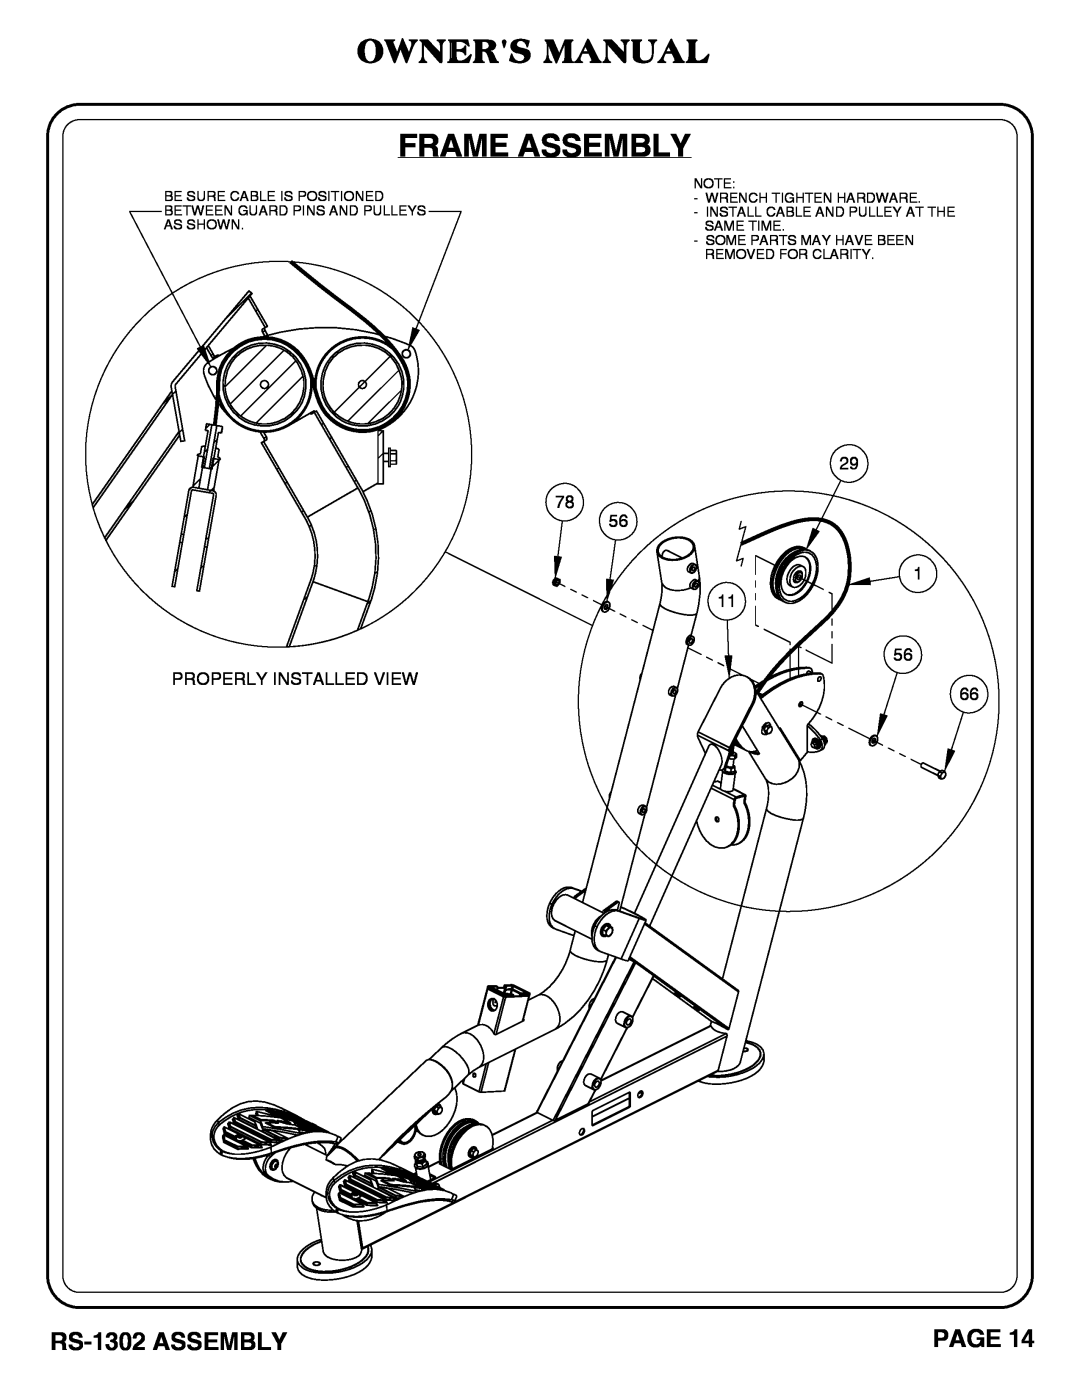 Hoist Fitness RS-1302 owner manual Owners Manual Frame Assembly, Page, Some Parts May Have Been Removed For Clarity 